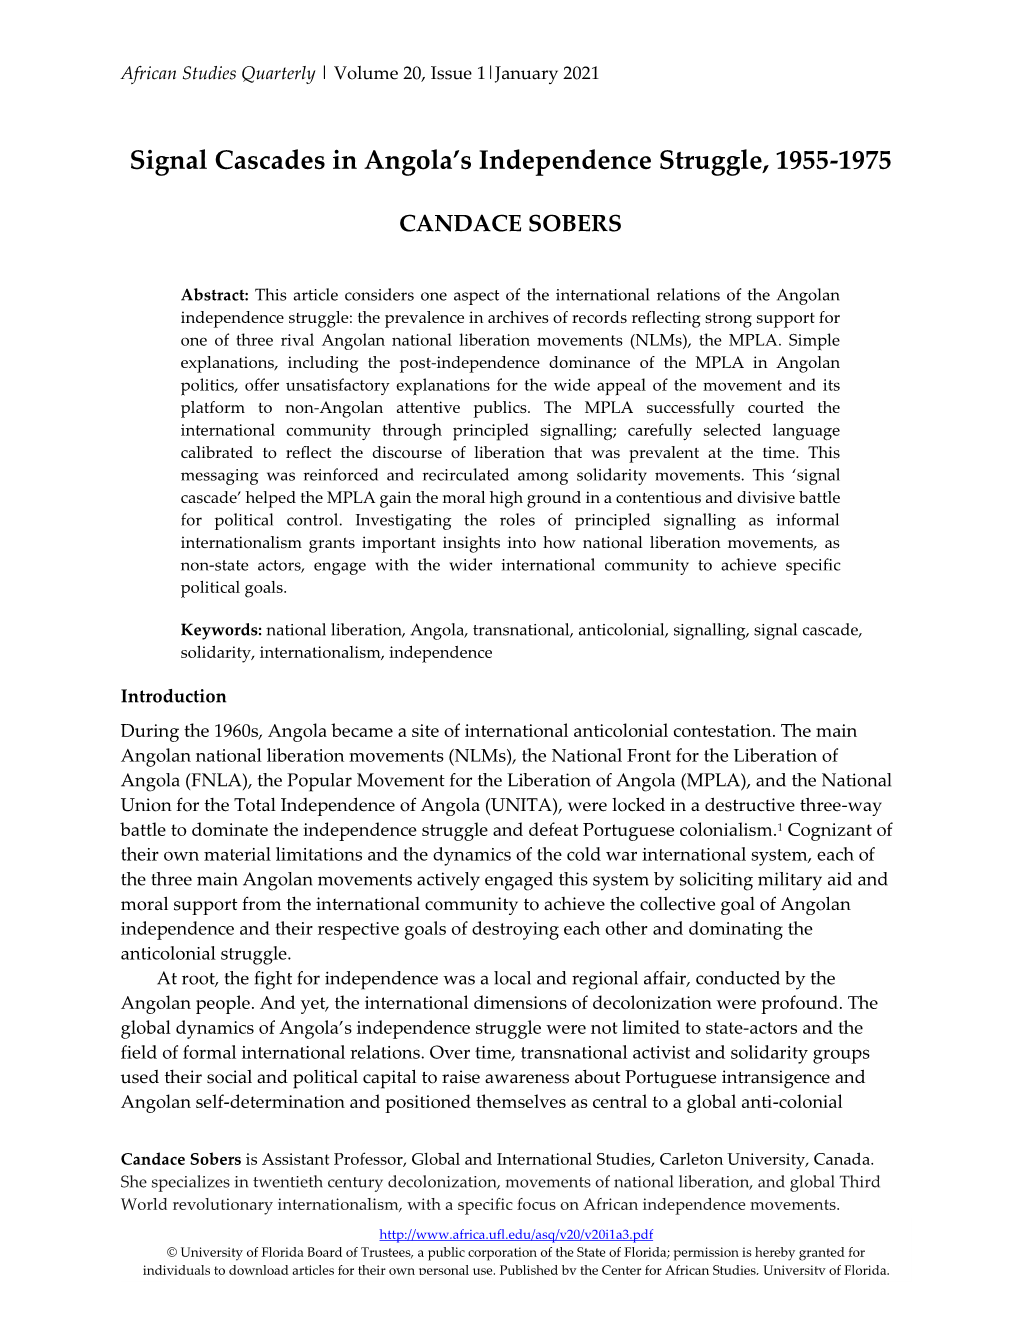 Signal Cascades in Angola's Independence Struggle, 1955-1975